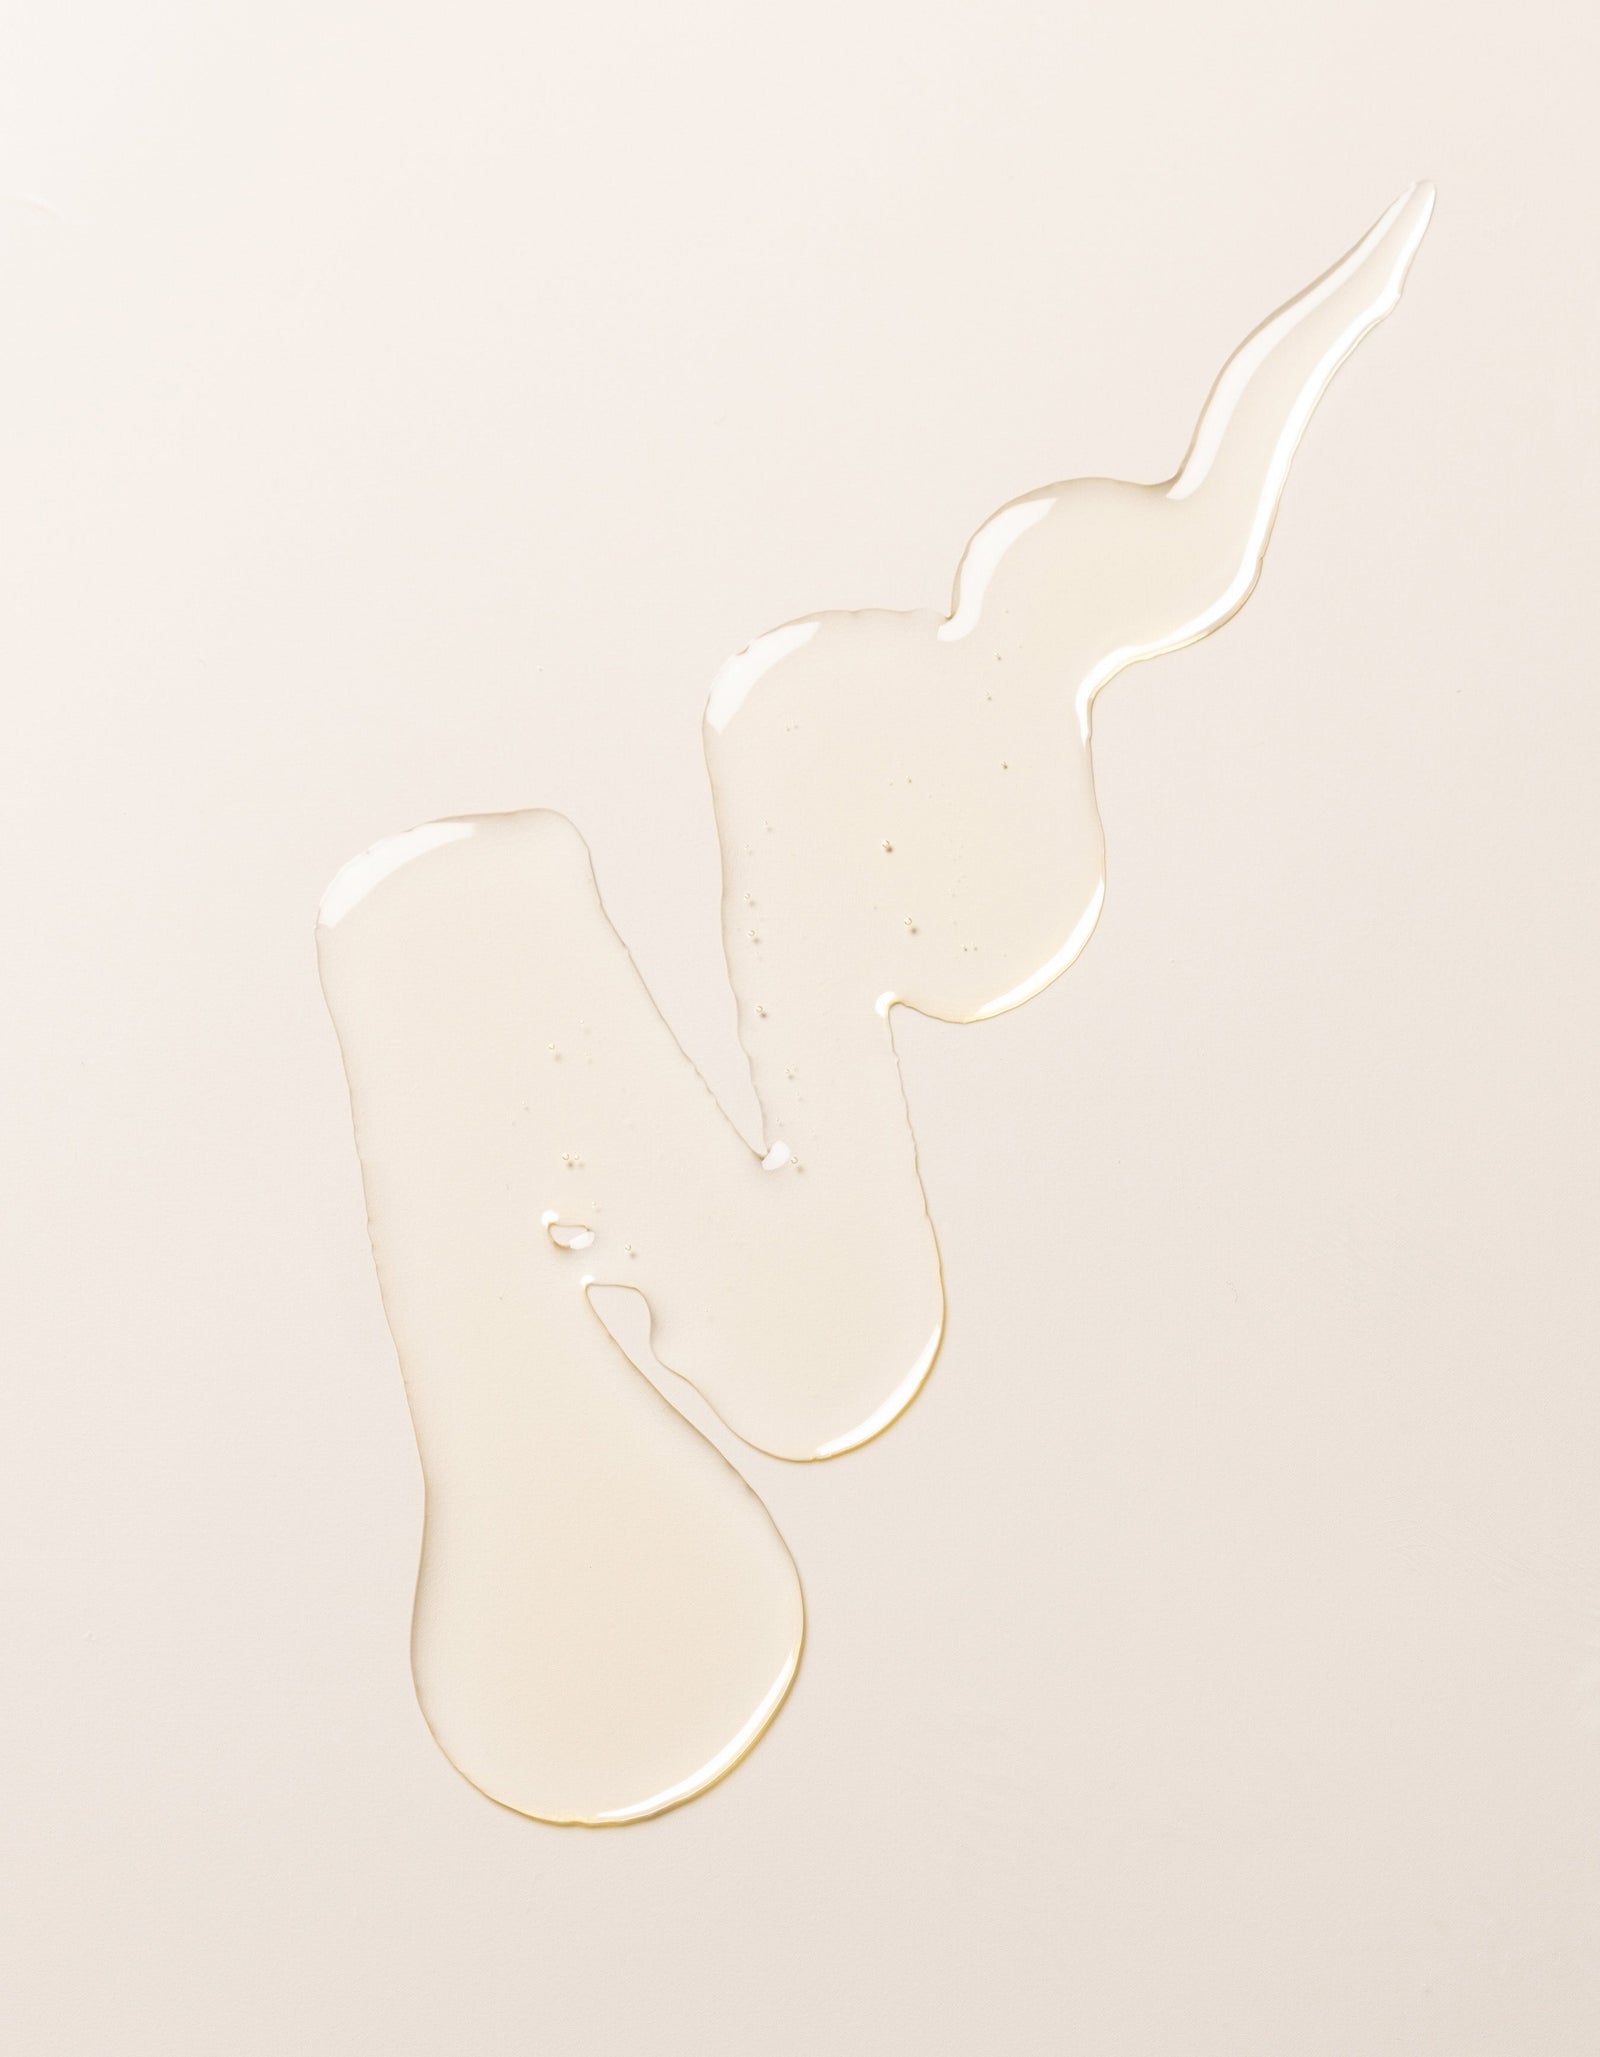 An irregular-shaped spill of Cozy Earth's Oil Cleanser on a smooth, light-colored surface. The clear liquid forms a long, winding pattern with droplets and uneven edges, creating the impression of fluid motion.